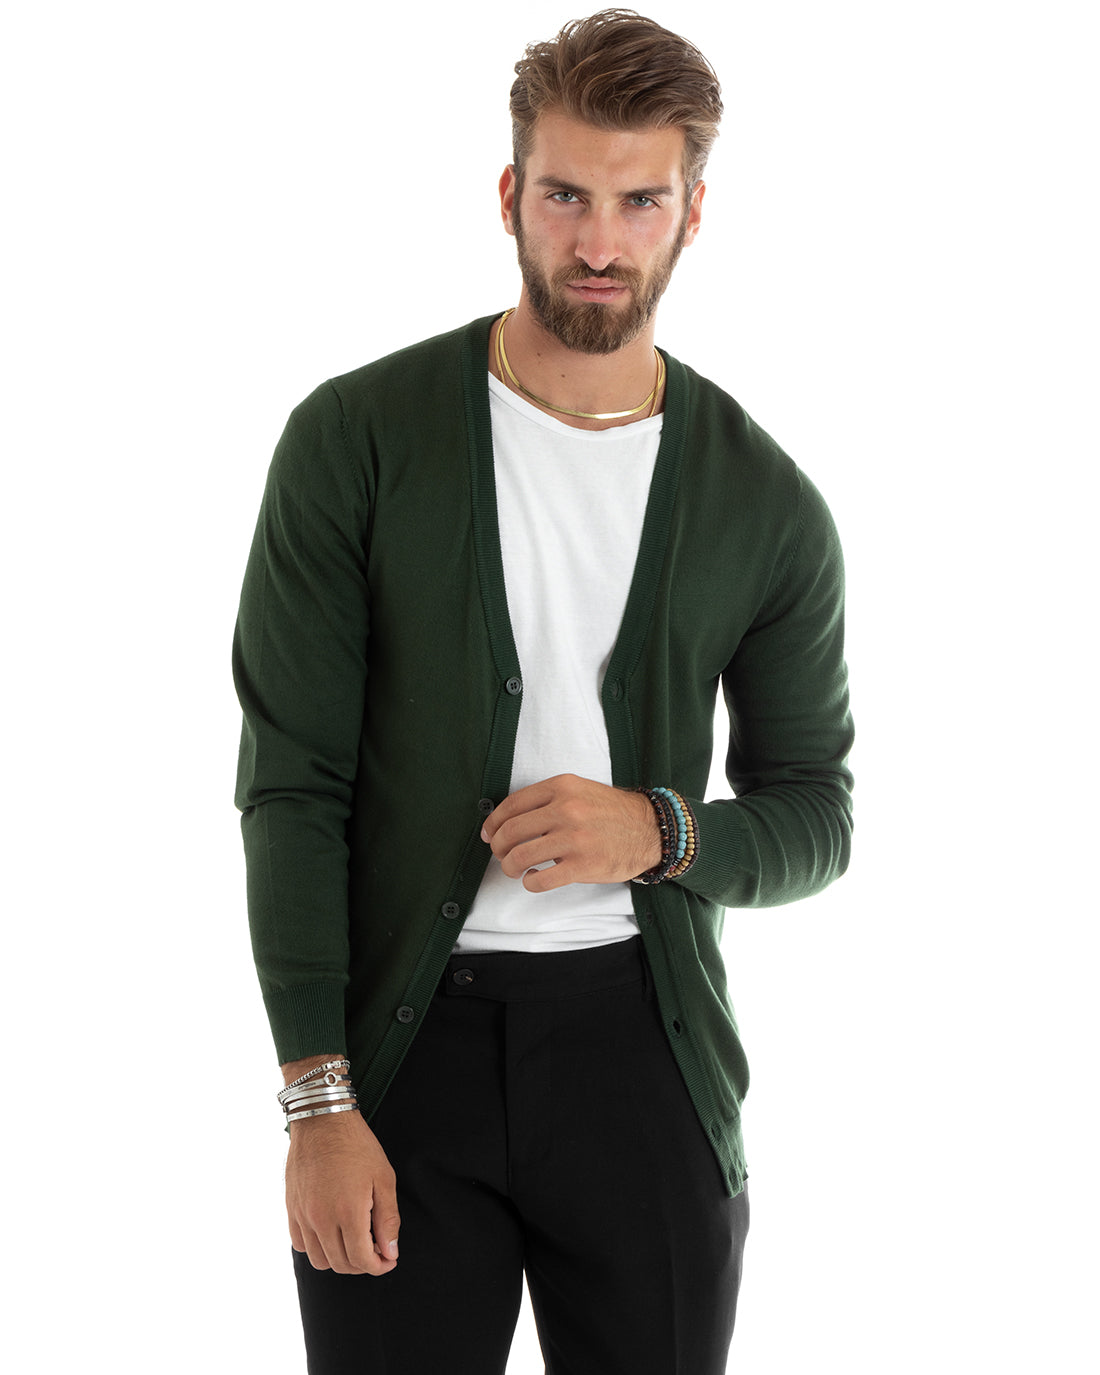 Men's Cardigan Jacket With Buttons V-Neck Sweater English Knit Petrol GIOSAL-M2678A